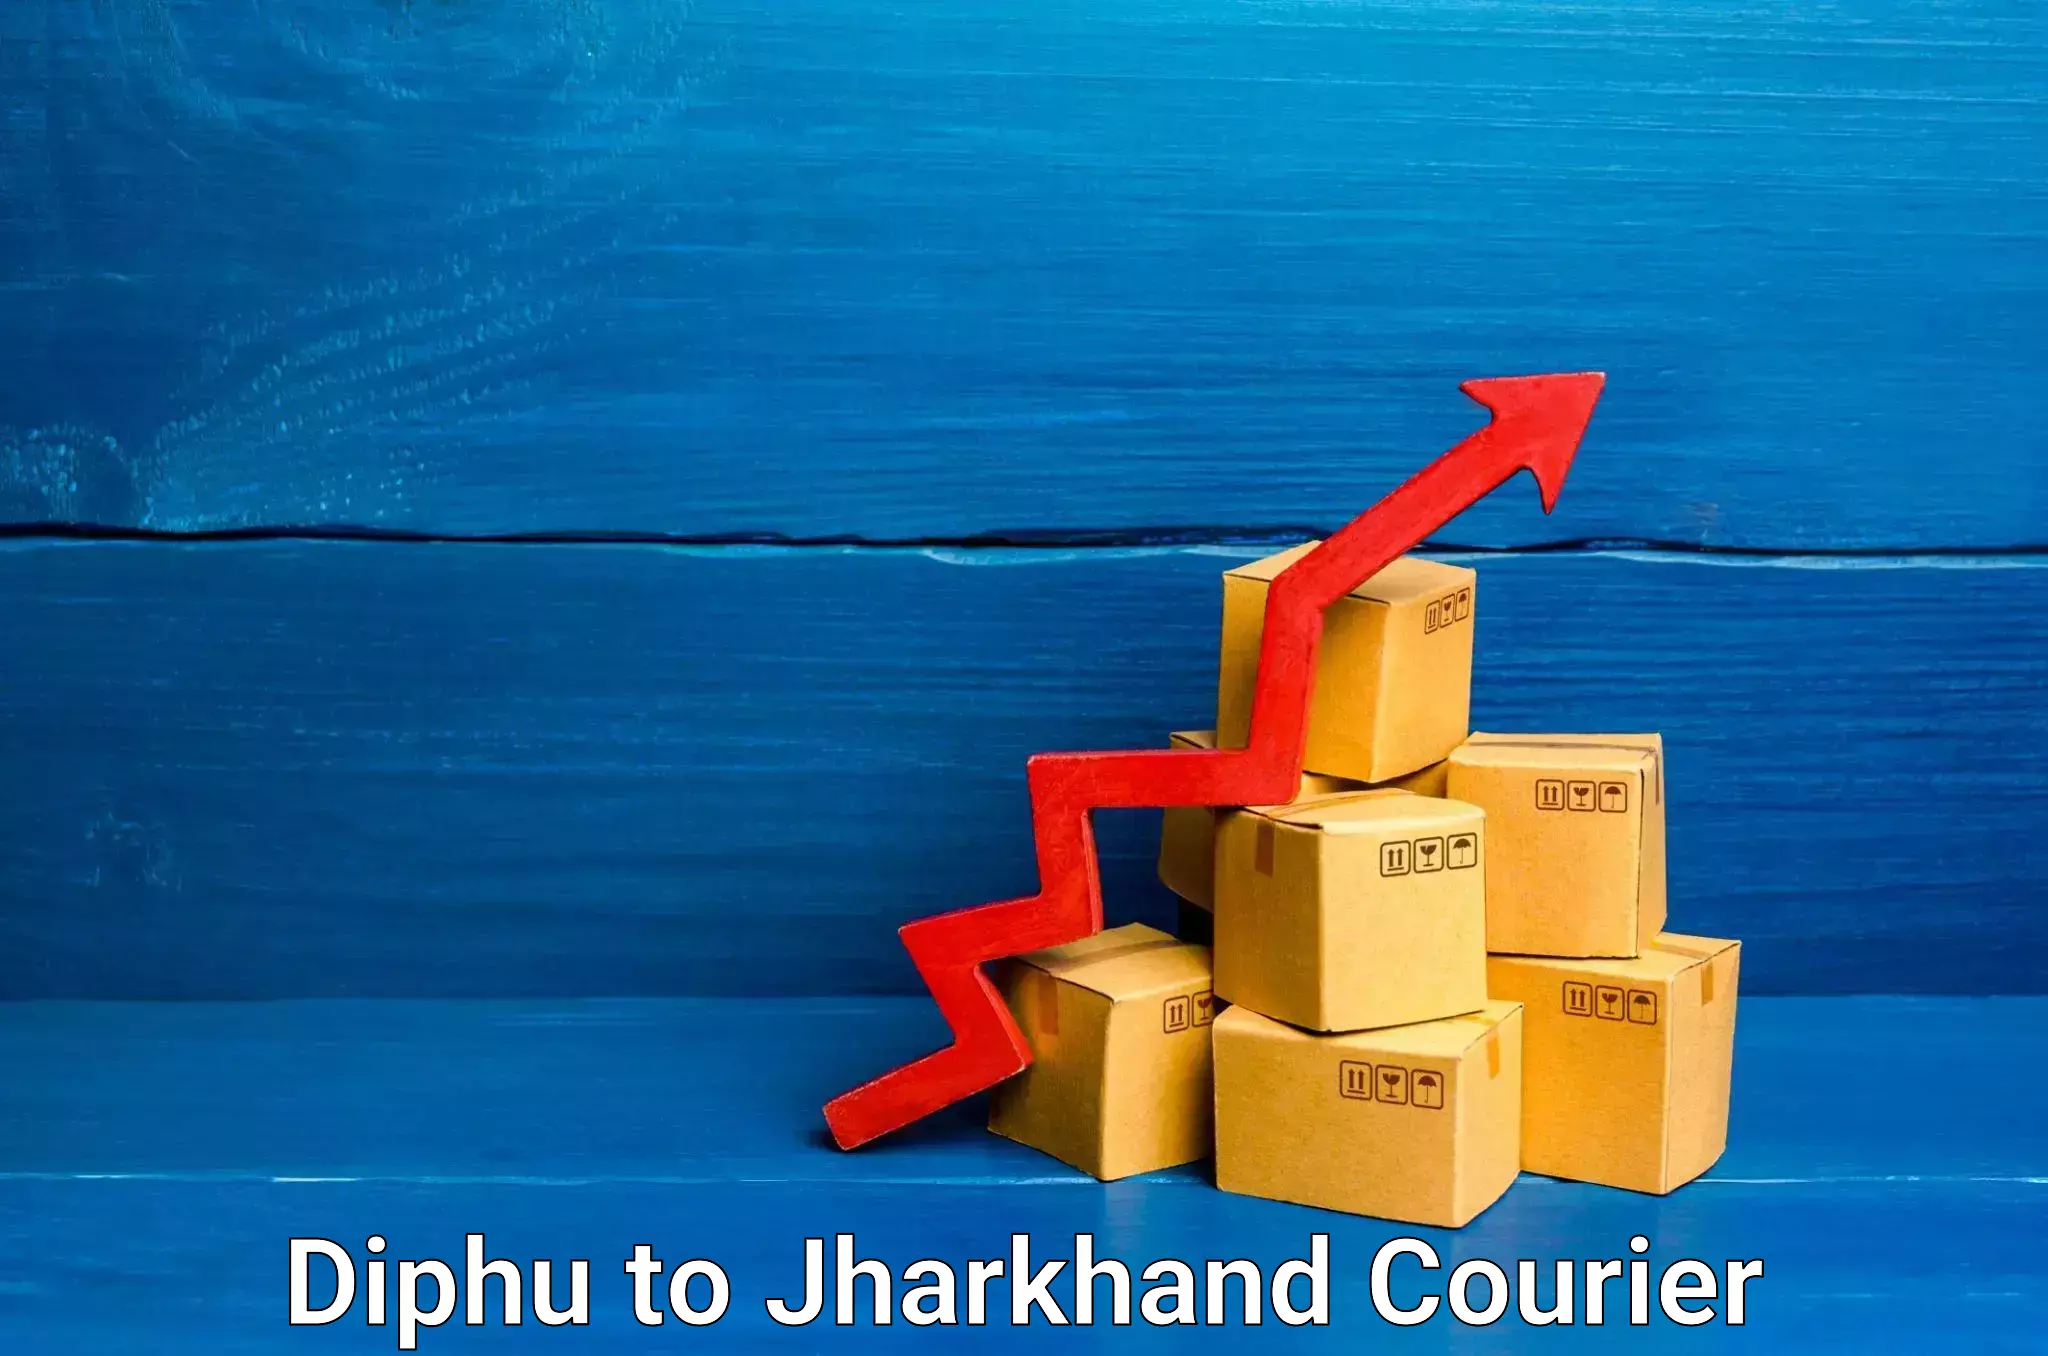 Secure package delivery Diphu to Dhanbad